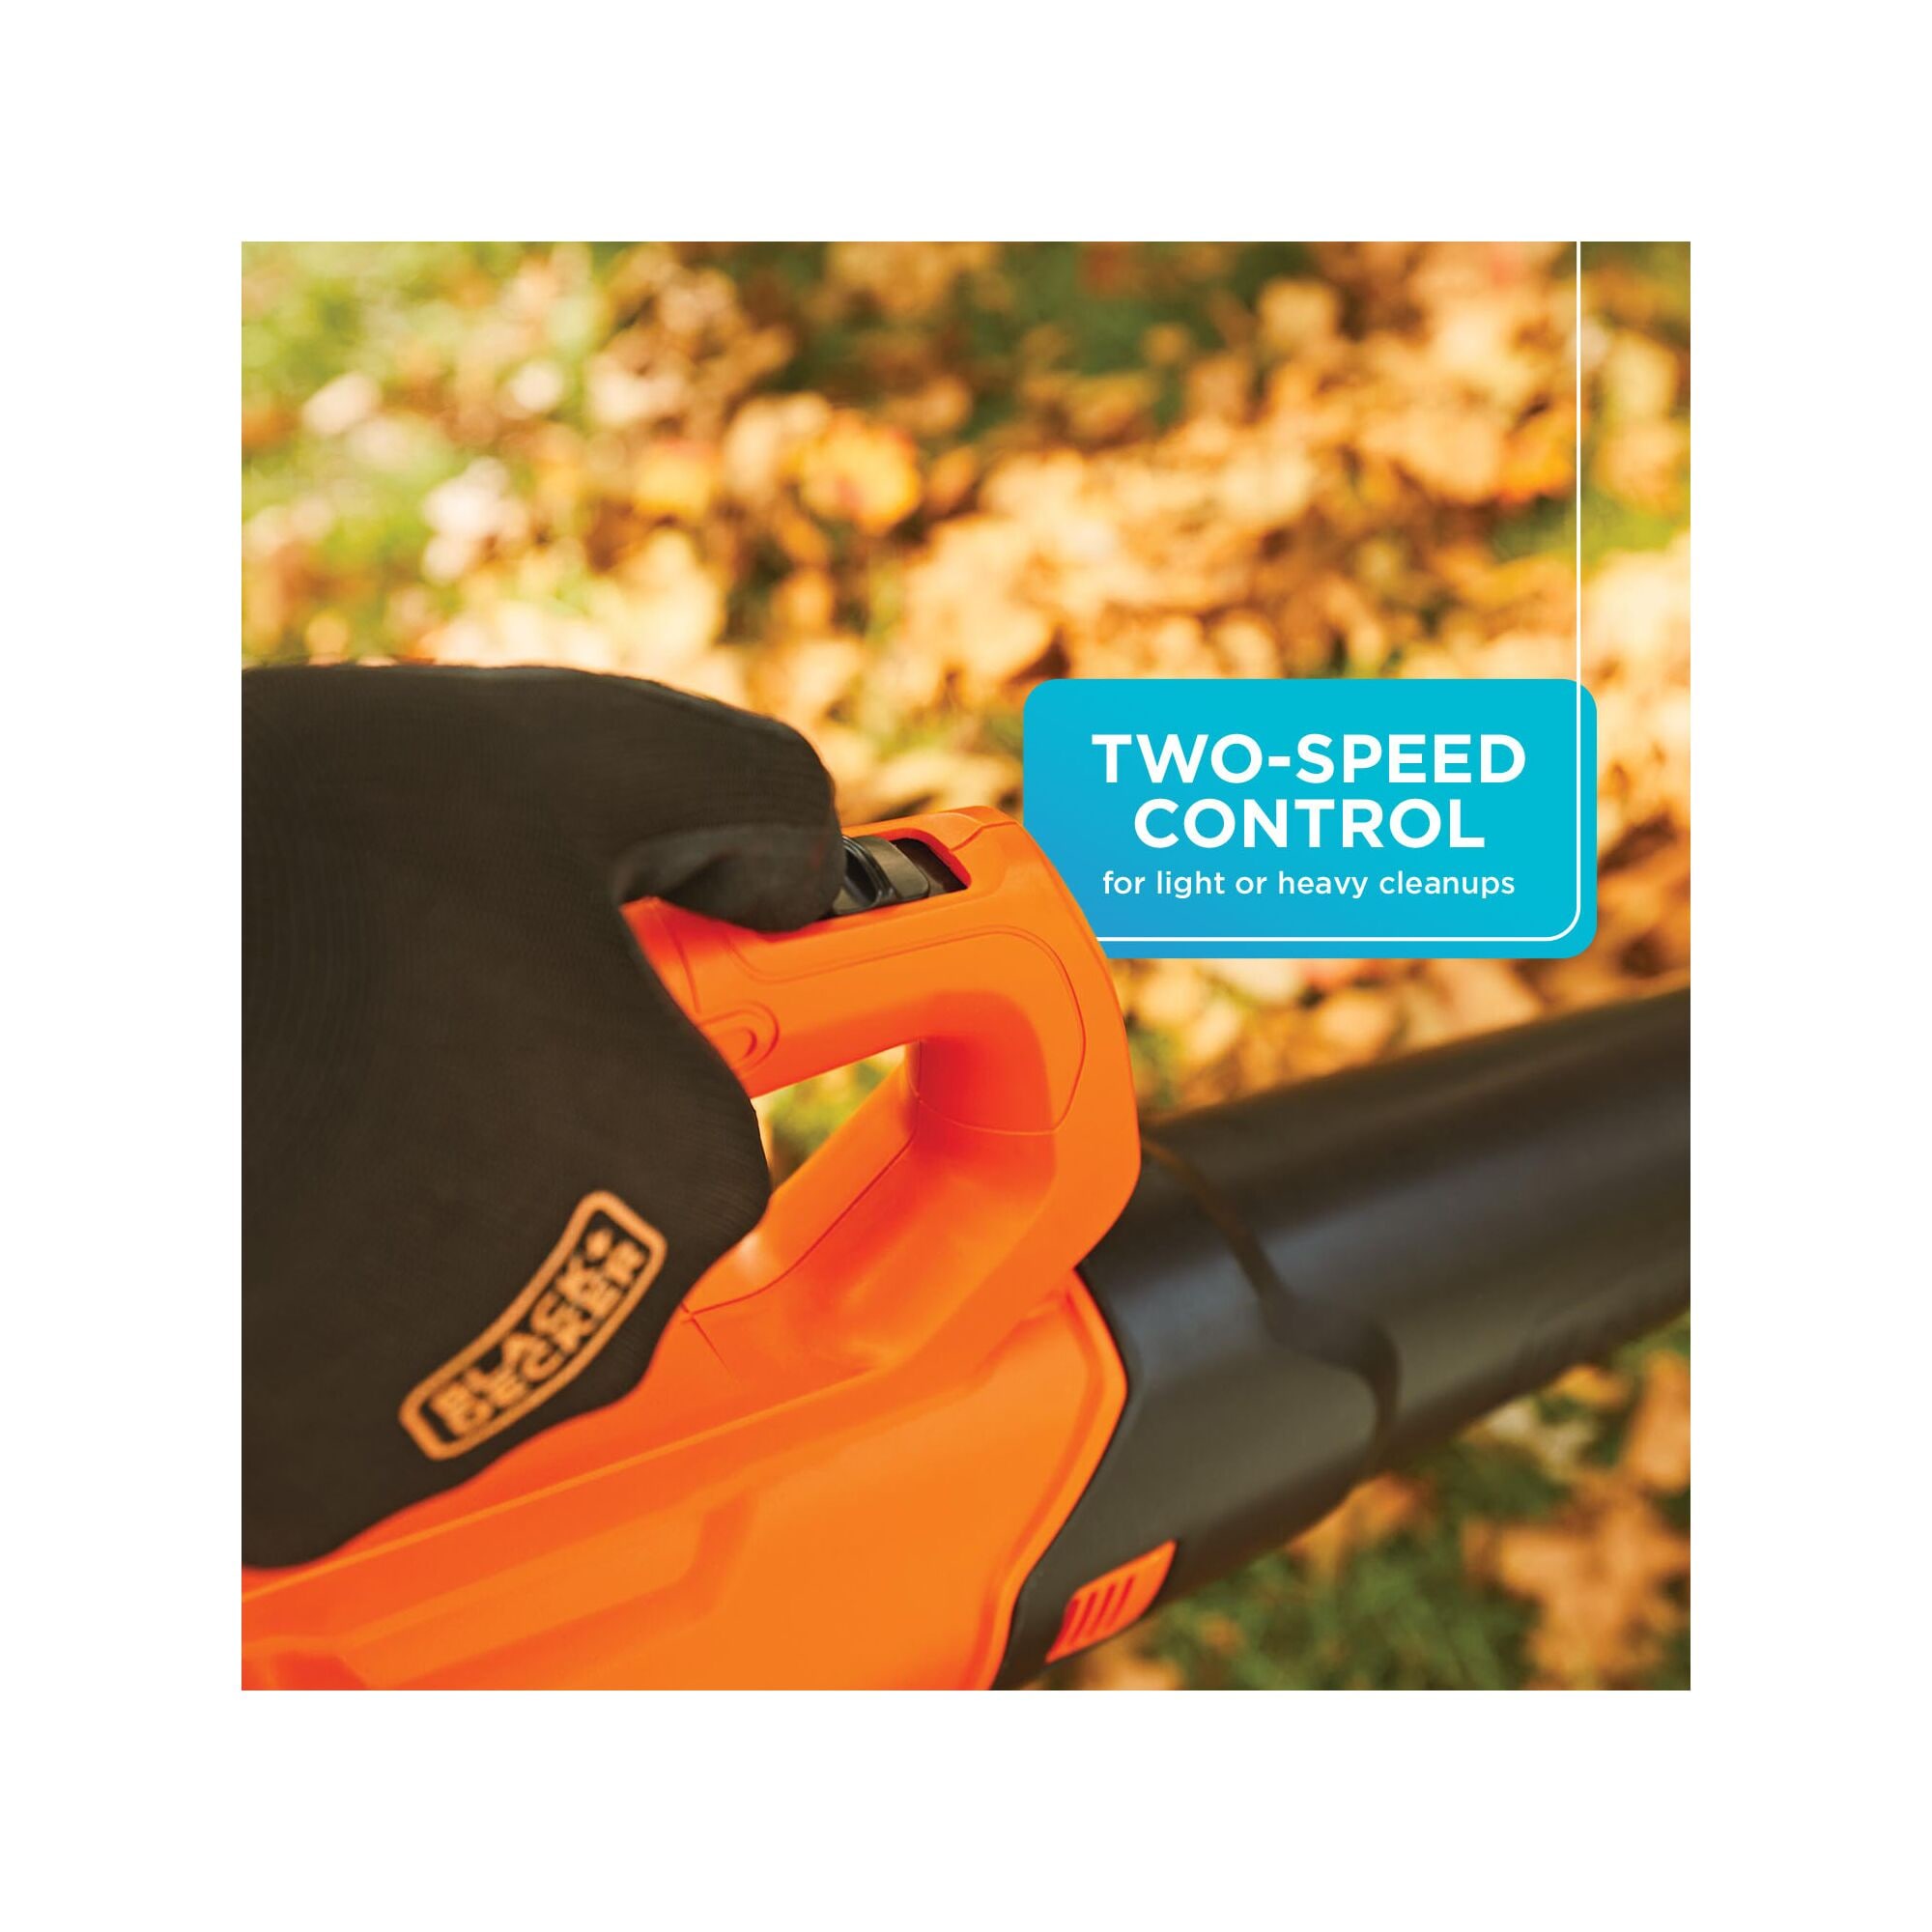 BLACK+DECKER 20V MAX Cordless Leaf Blower, 2-Speed, Up To 90 MPH, with  Battery and Charger (BCBL700D1)